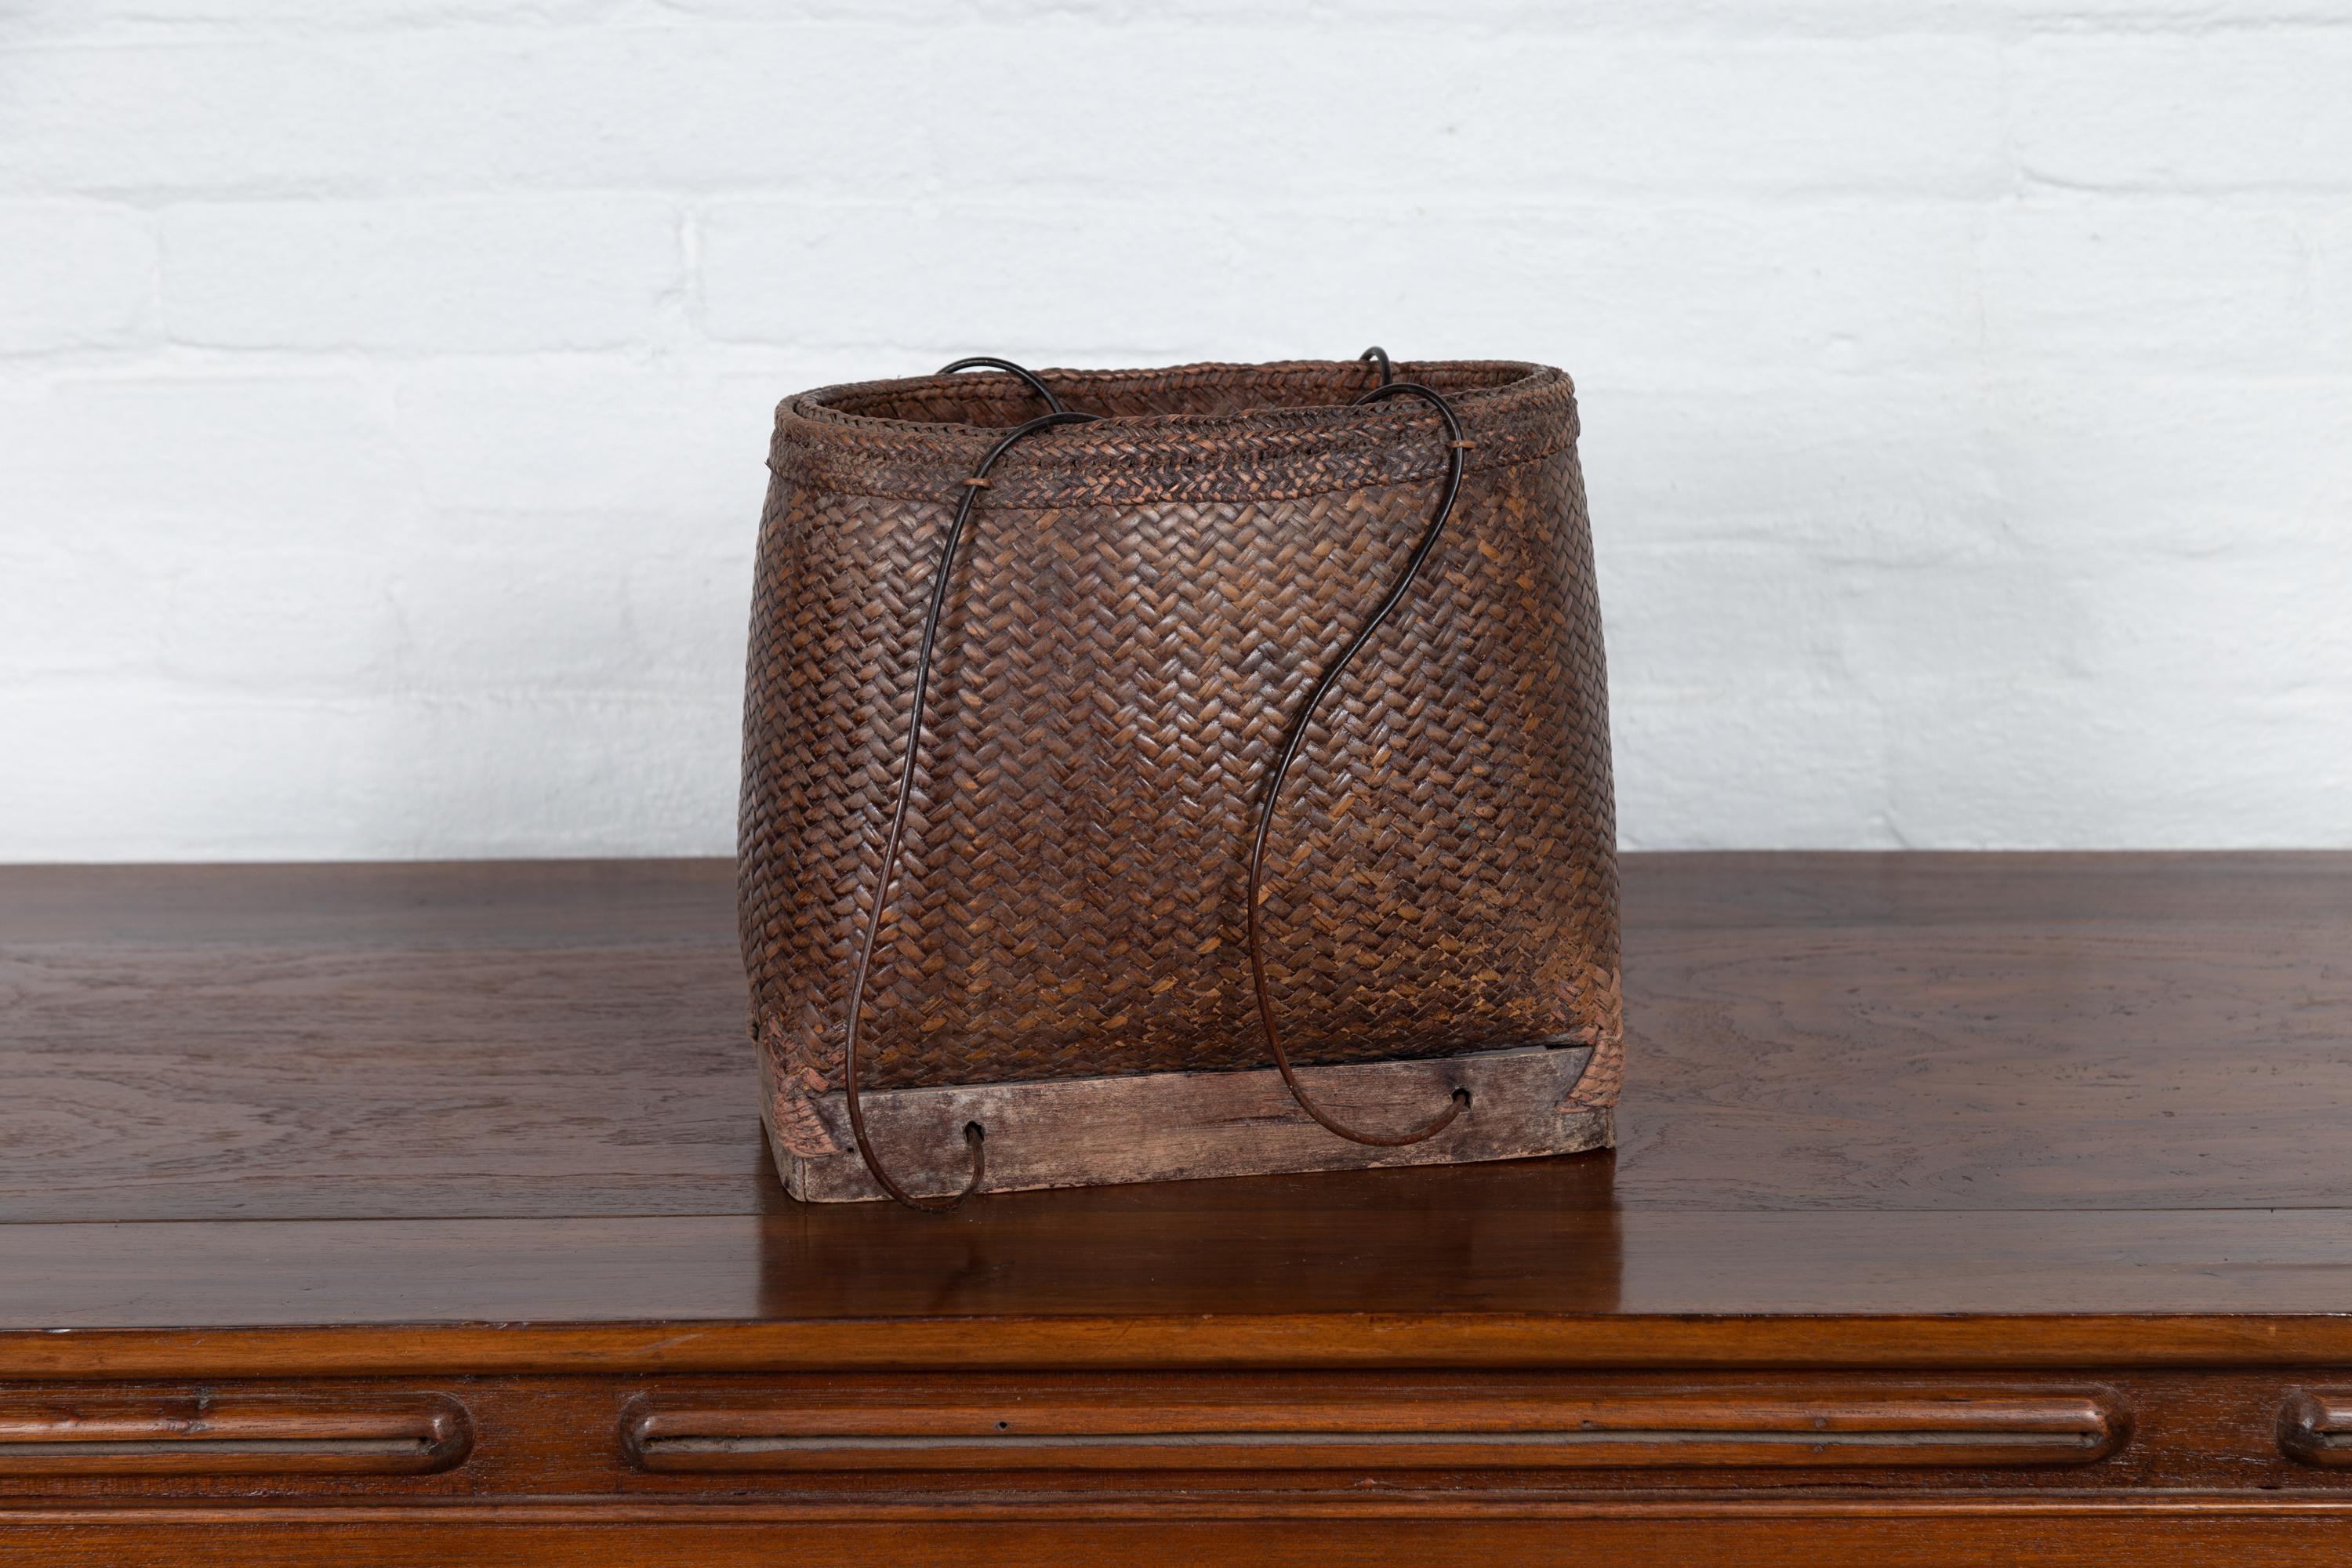 An antique early 20th century small woven carrying grain basket from the Philippines with wooden base. Charming our eyes with its nicely rustic appearance, this woven basket reminds us of the history and use that gives it its charming character.